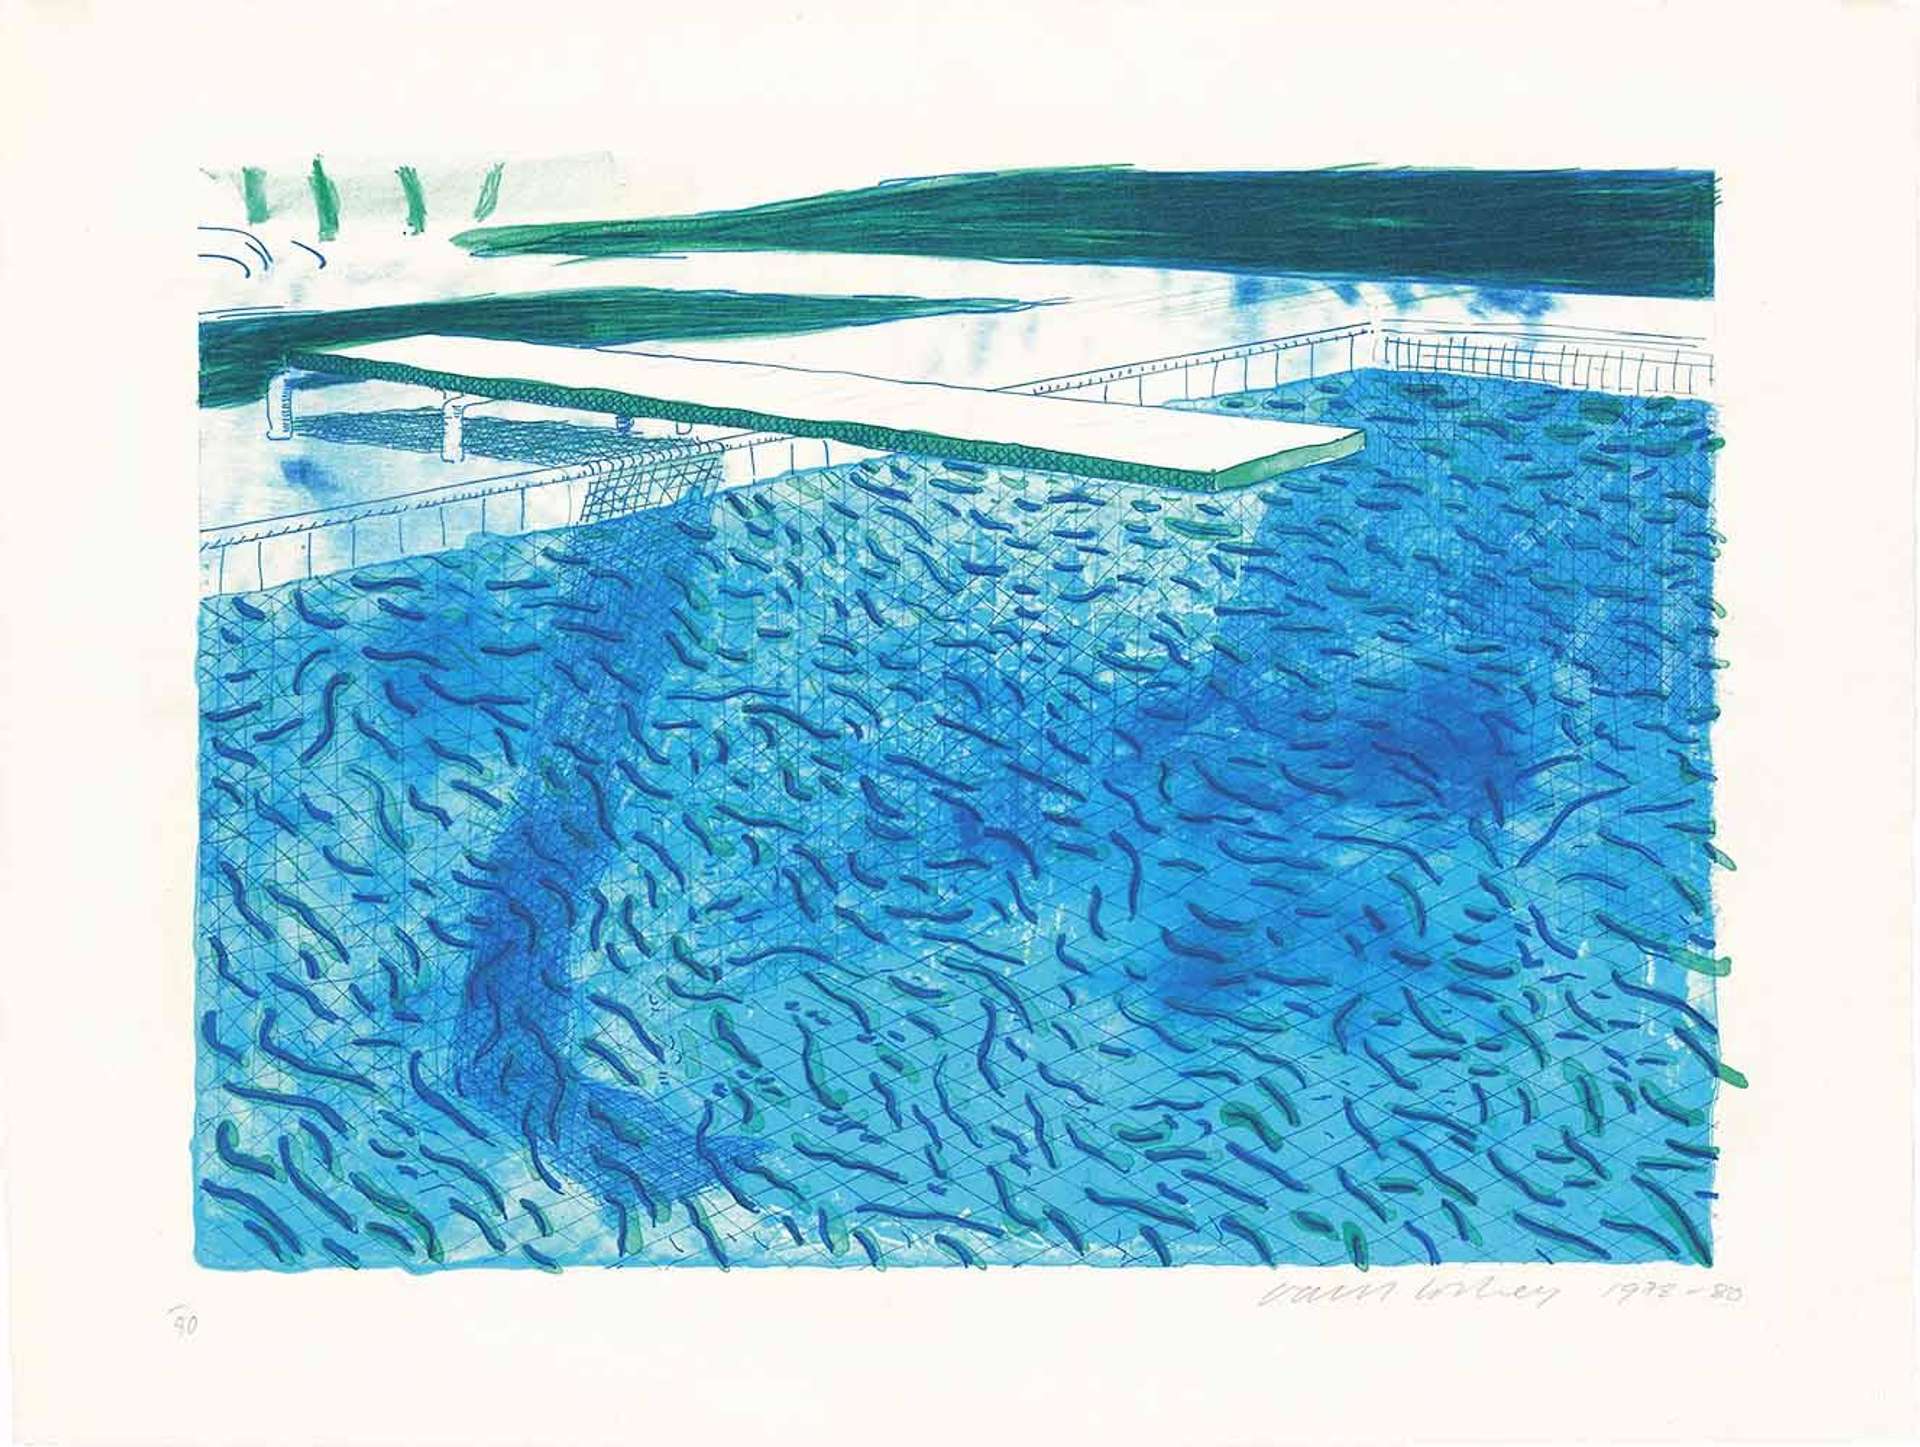 A lithograph by David Hockney depicting a blue swimming pool, with darker lines to delineate waves in the water. From the left side of the composition, a white diving board extends over the pool through the centre of the composition.